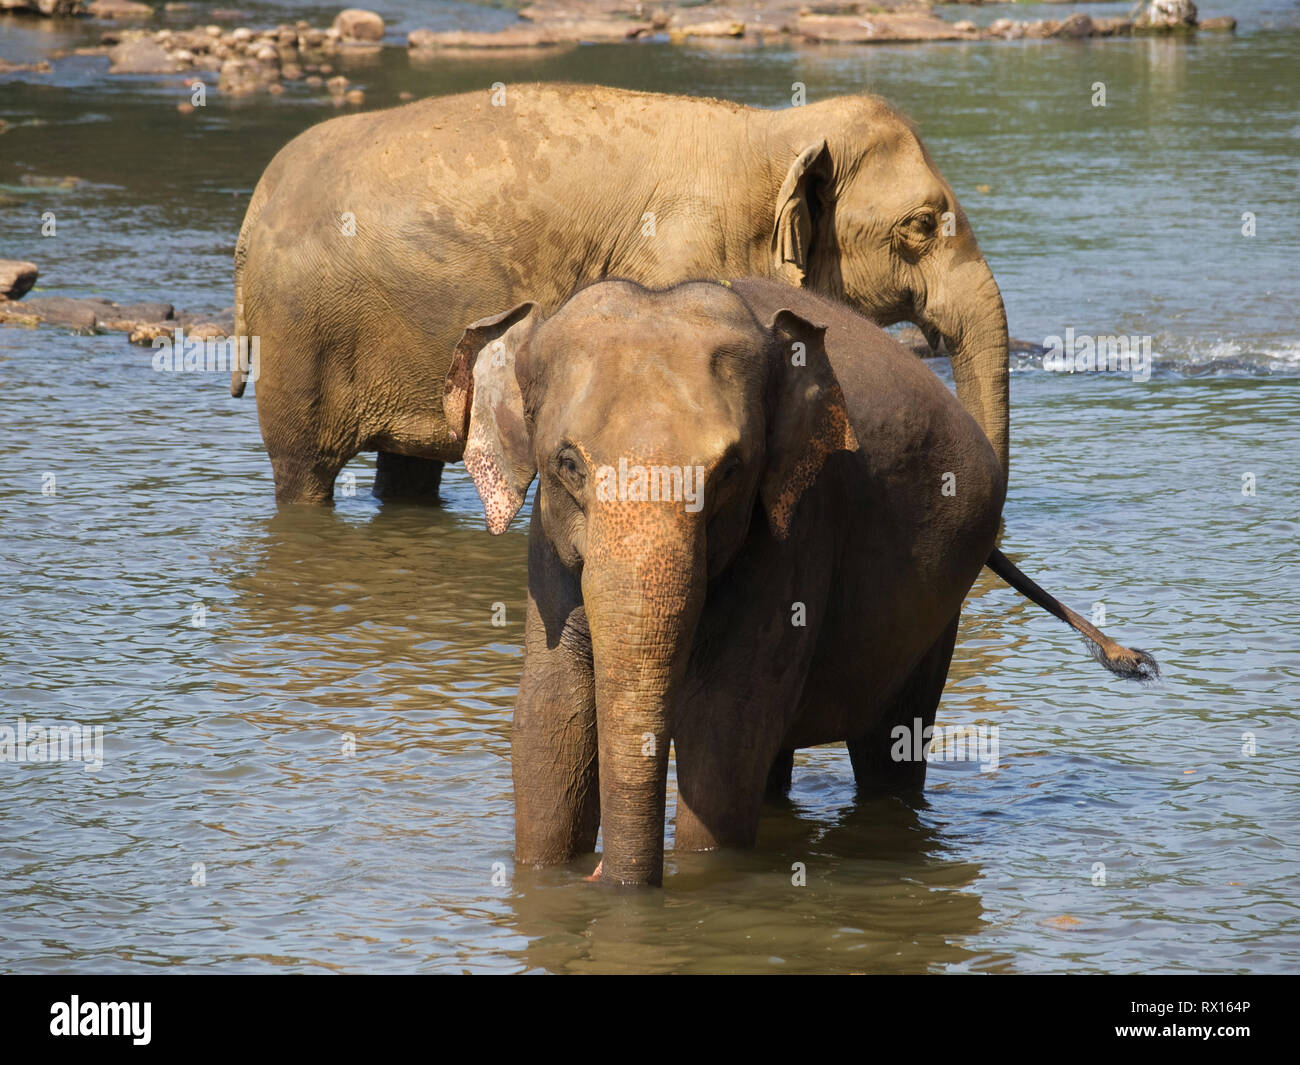 Two elephants in river - Elephas maximus Stock Photo